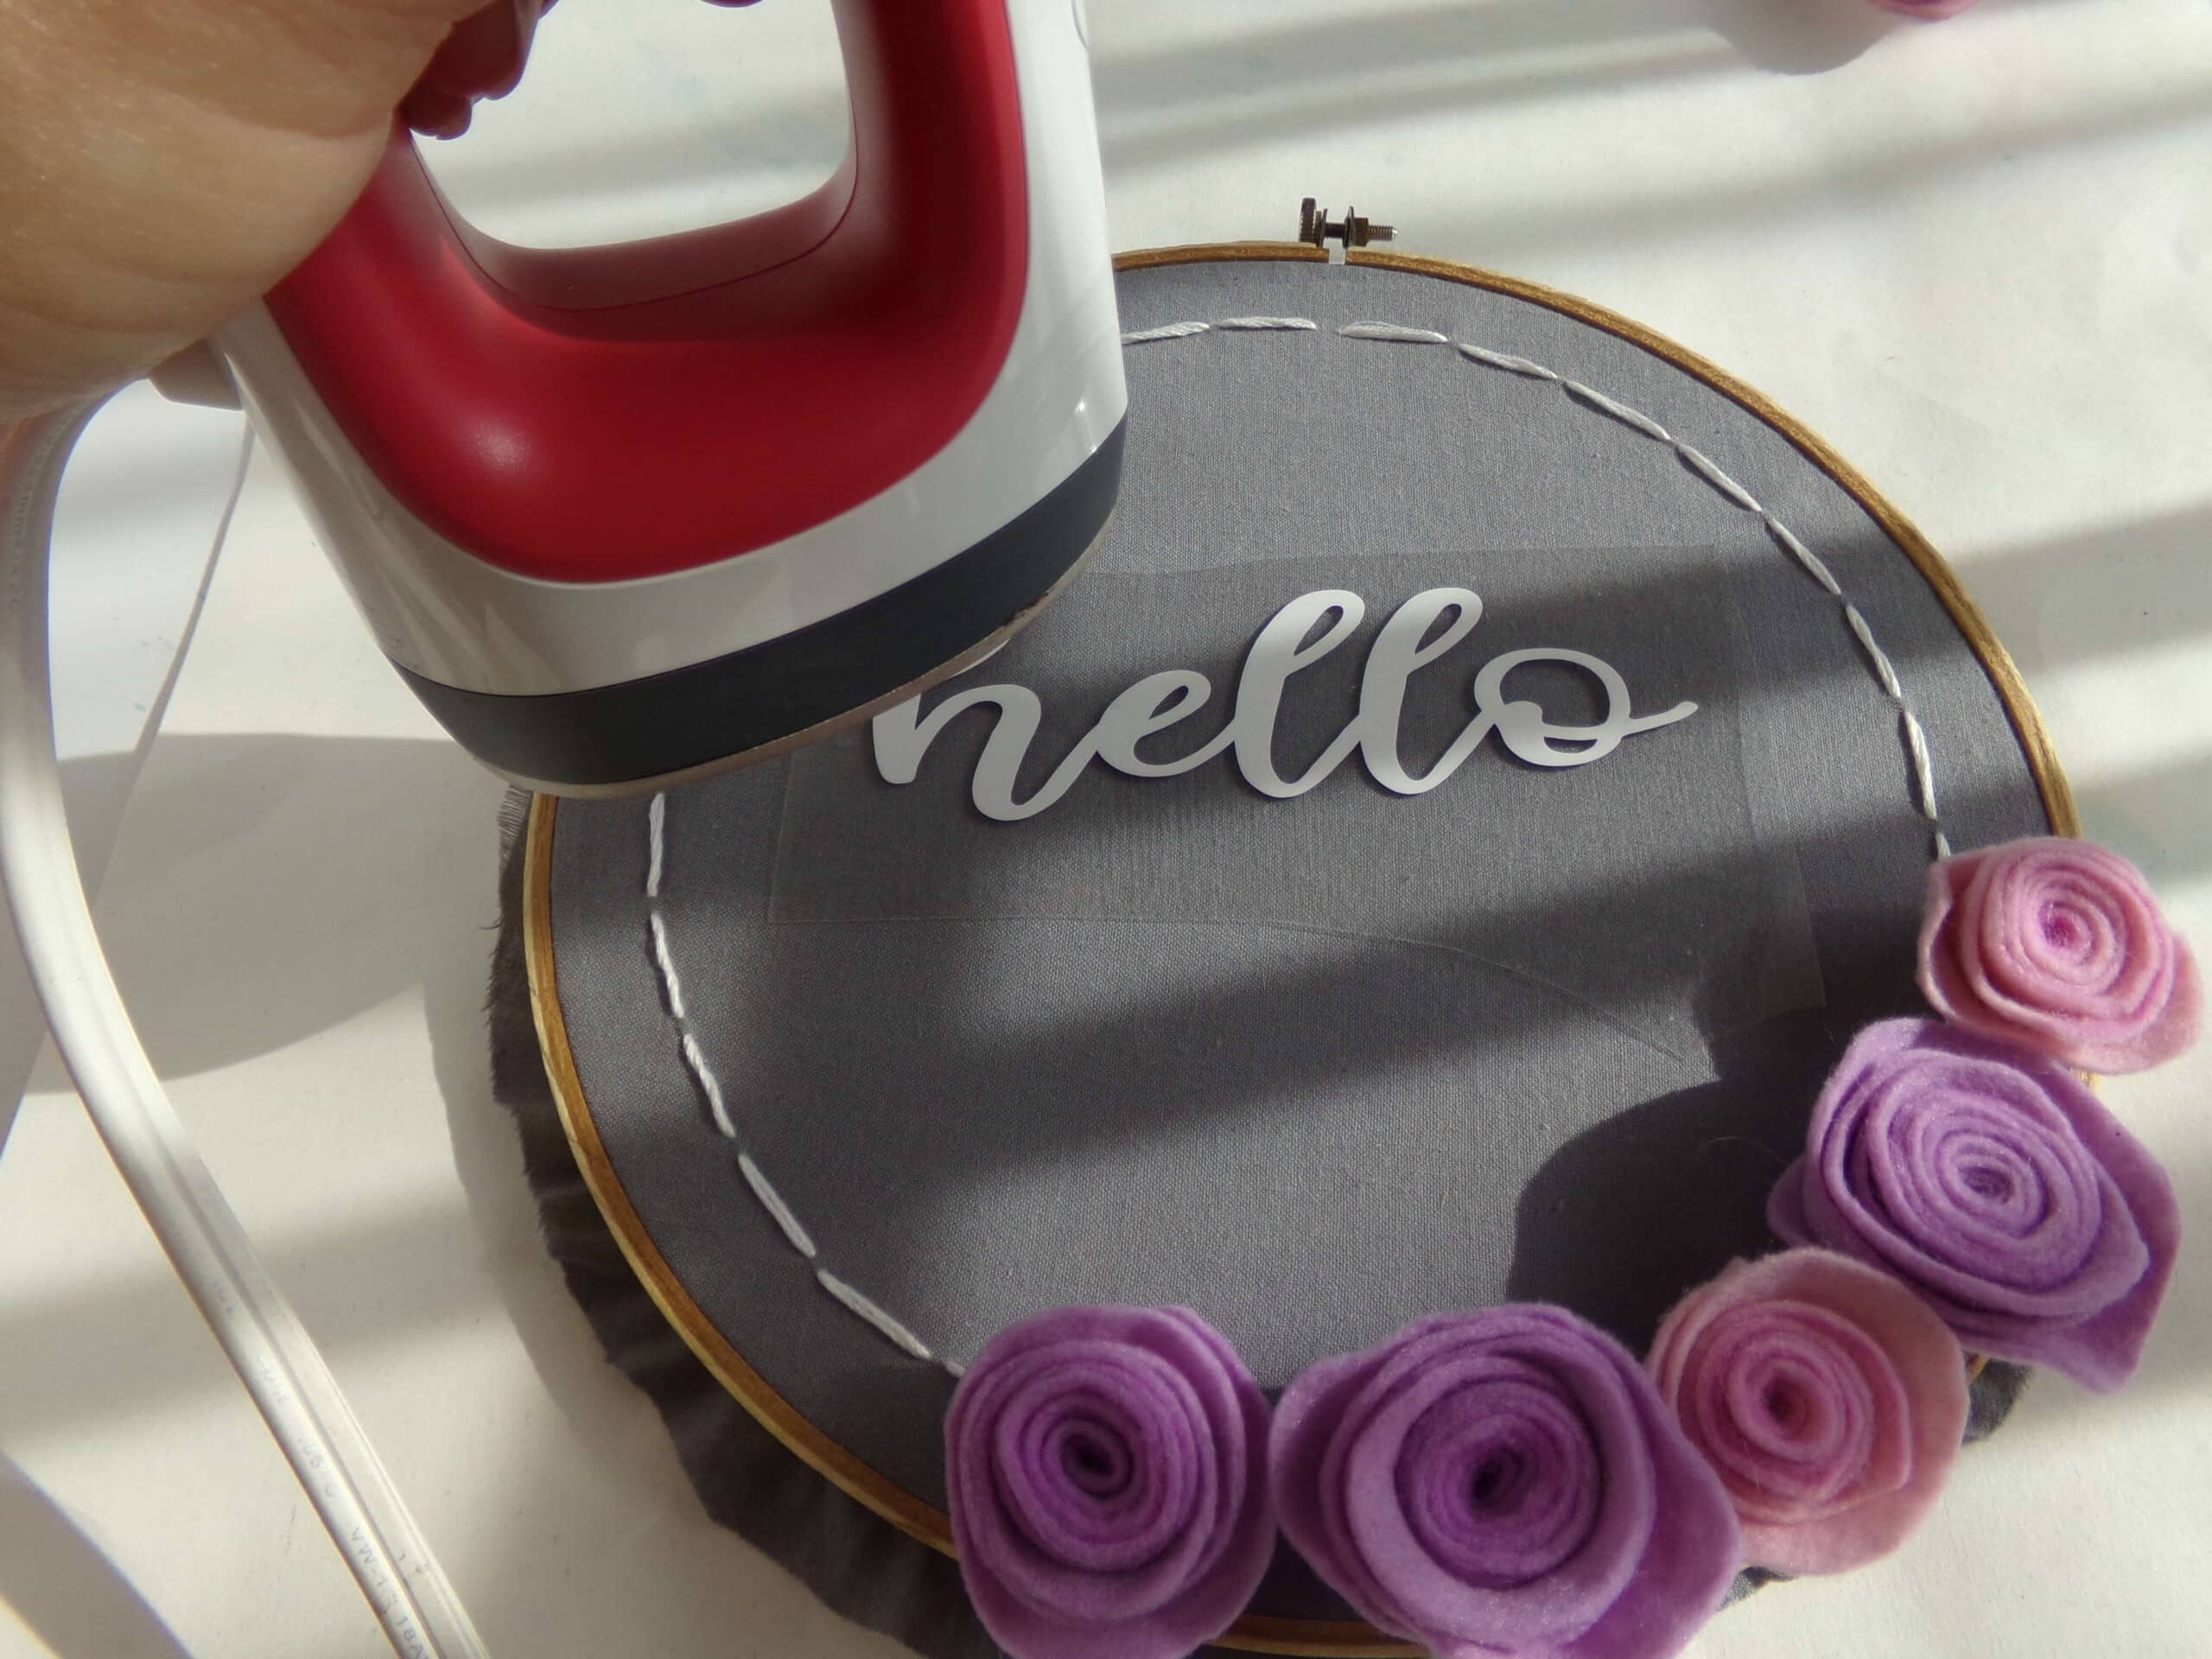 adding cricut cut lettering to a wreath for an embroidery hoop wreath